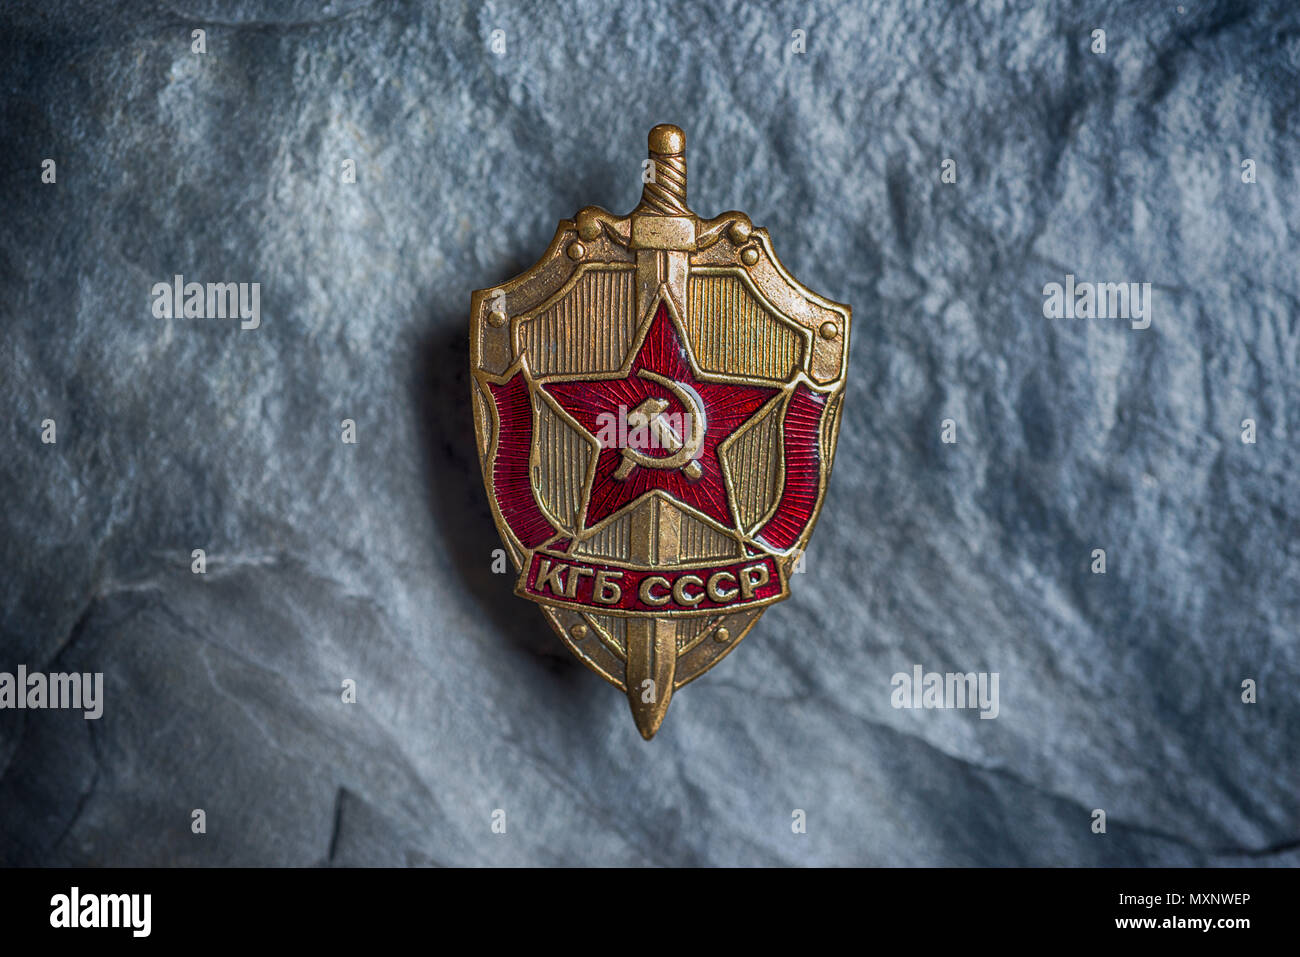 KGB USSR Soviet Russian Committee for State Security Secret Police Metal Badge. Stock Photo